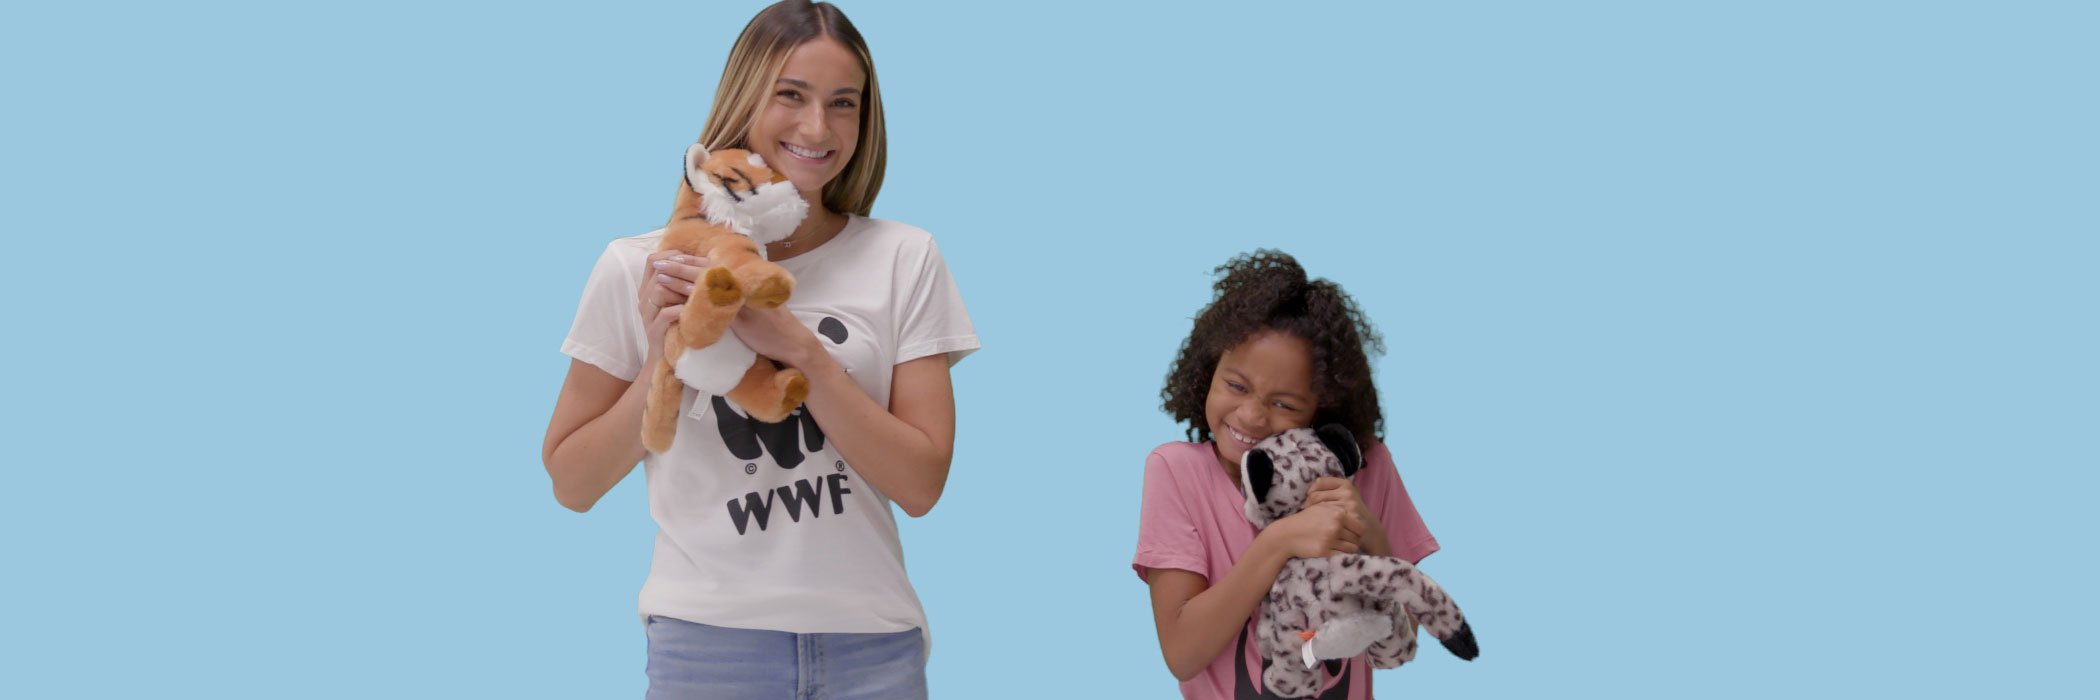 Woman and girl hold plush